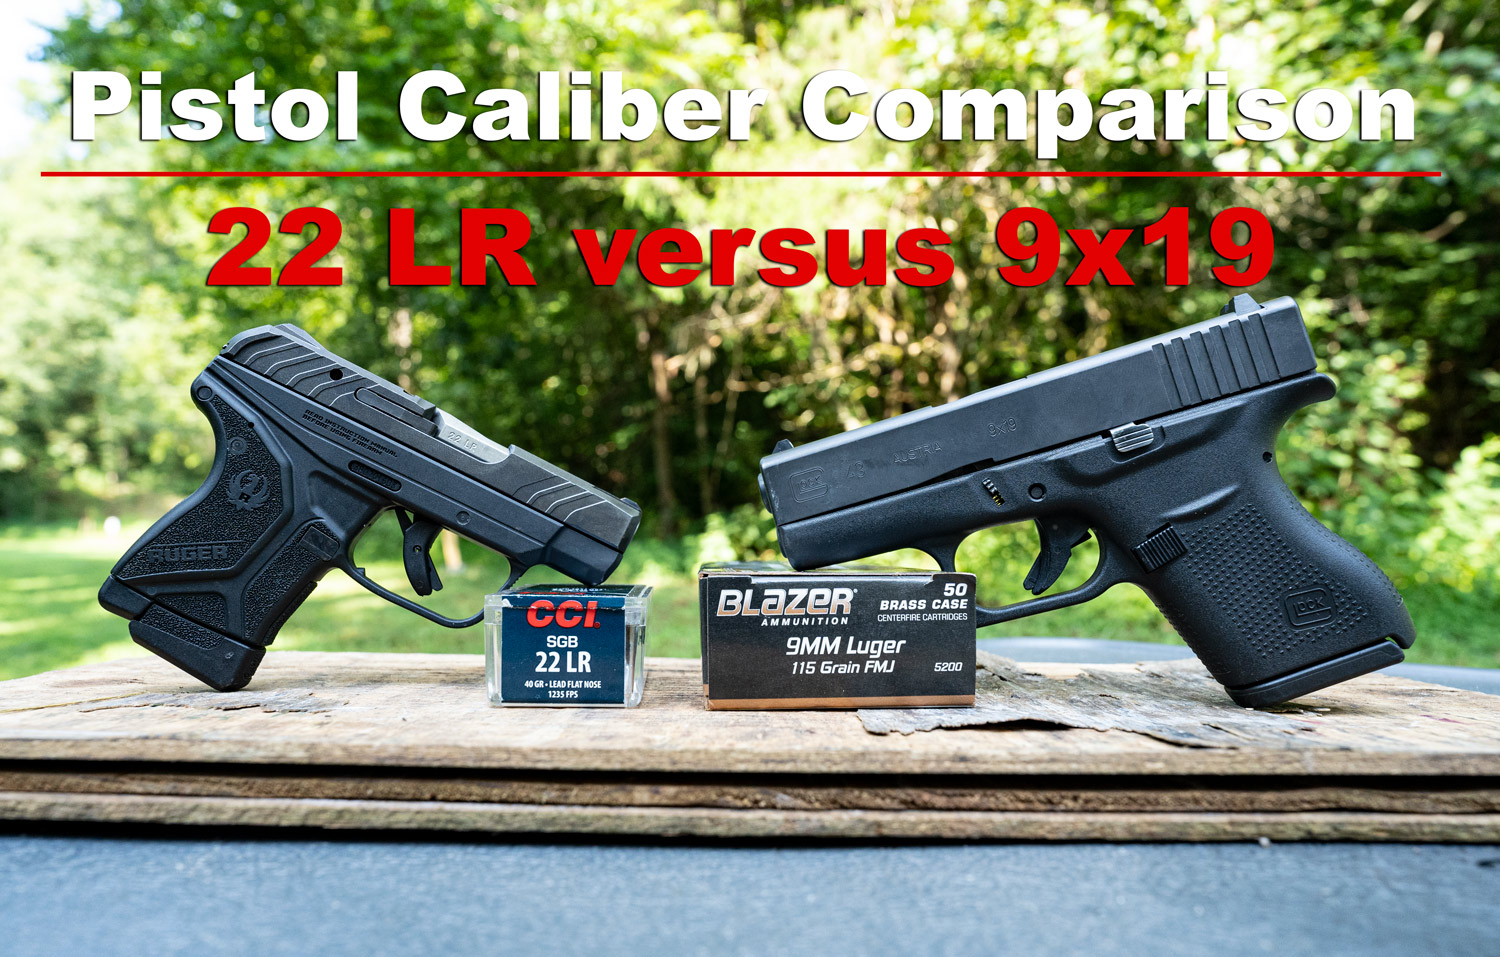 22LR vs 9mm - pistols and ammo at a shooting range